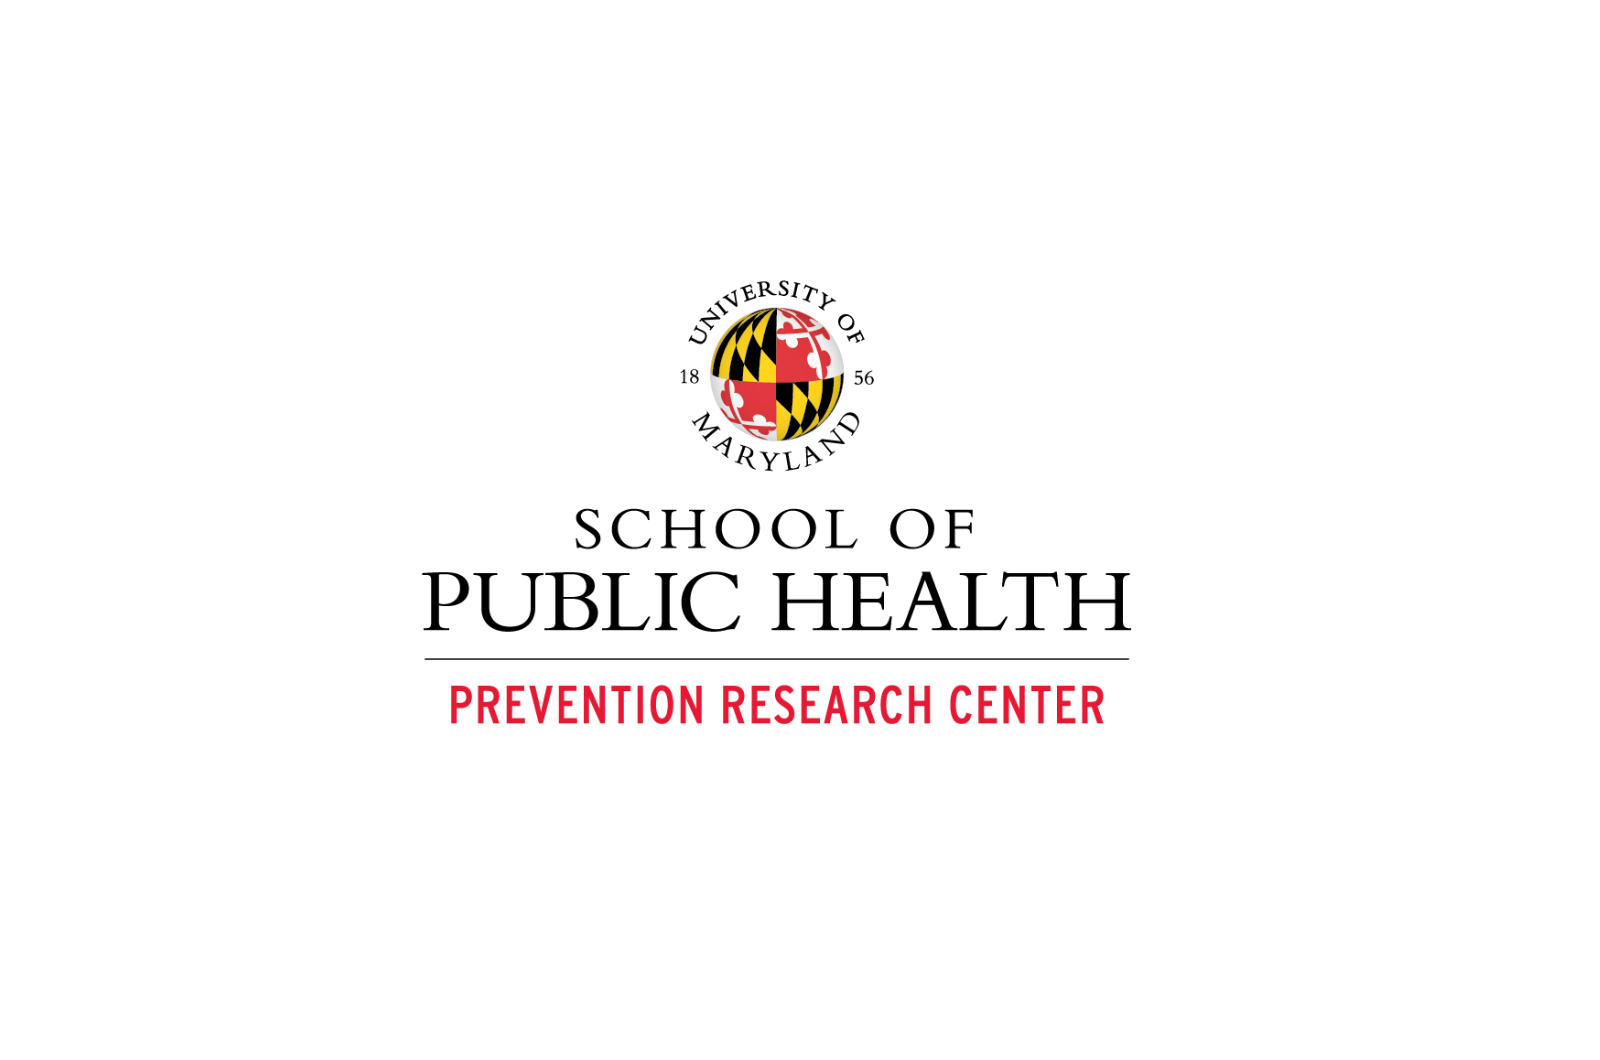 SPH - Prevention Research Center logo on white background